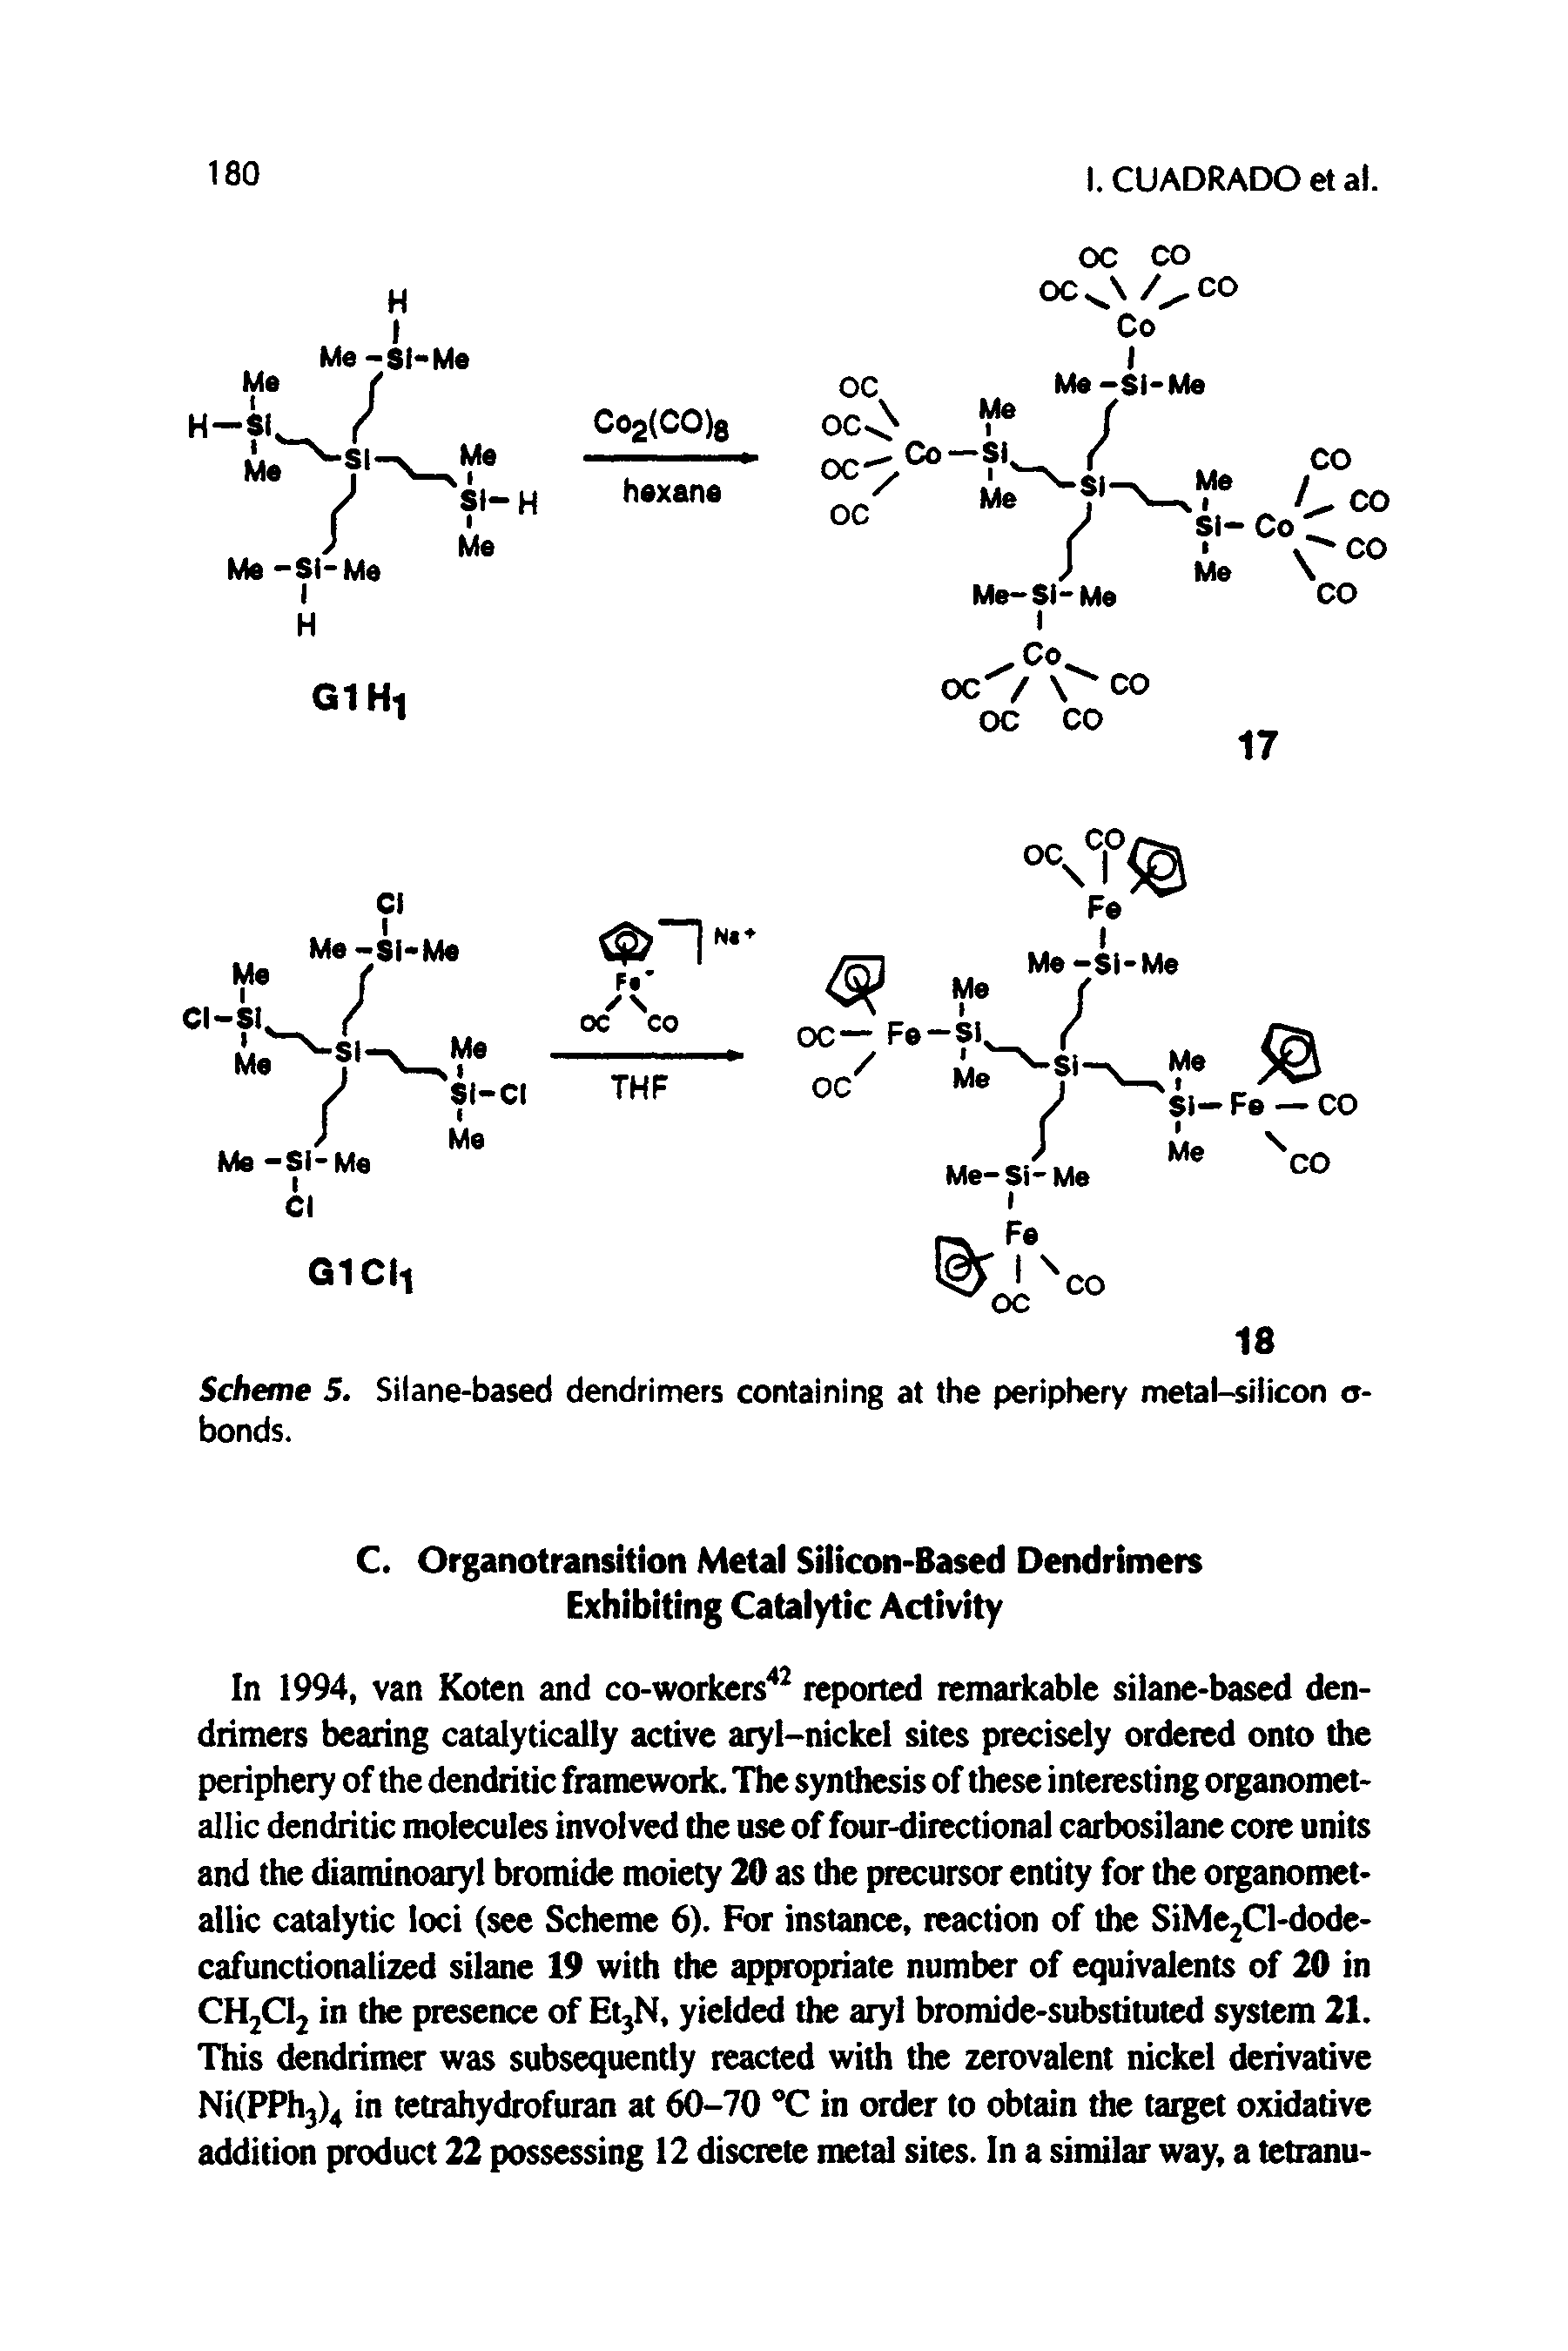 Scheme 5. Silane-based dendrimers containing at the periphery metal-silicon o-bonds.